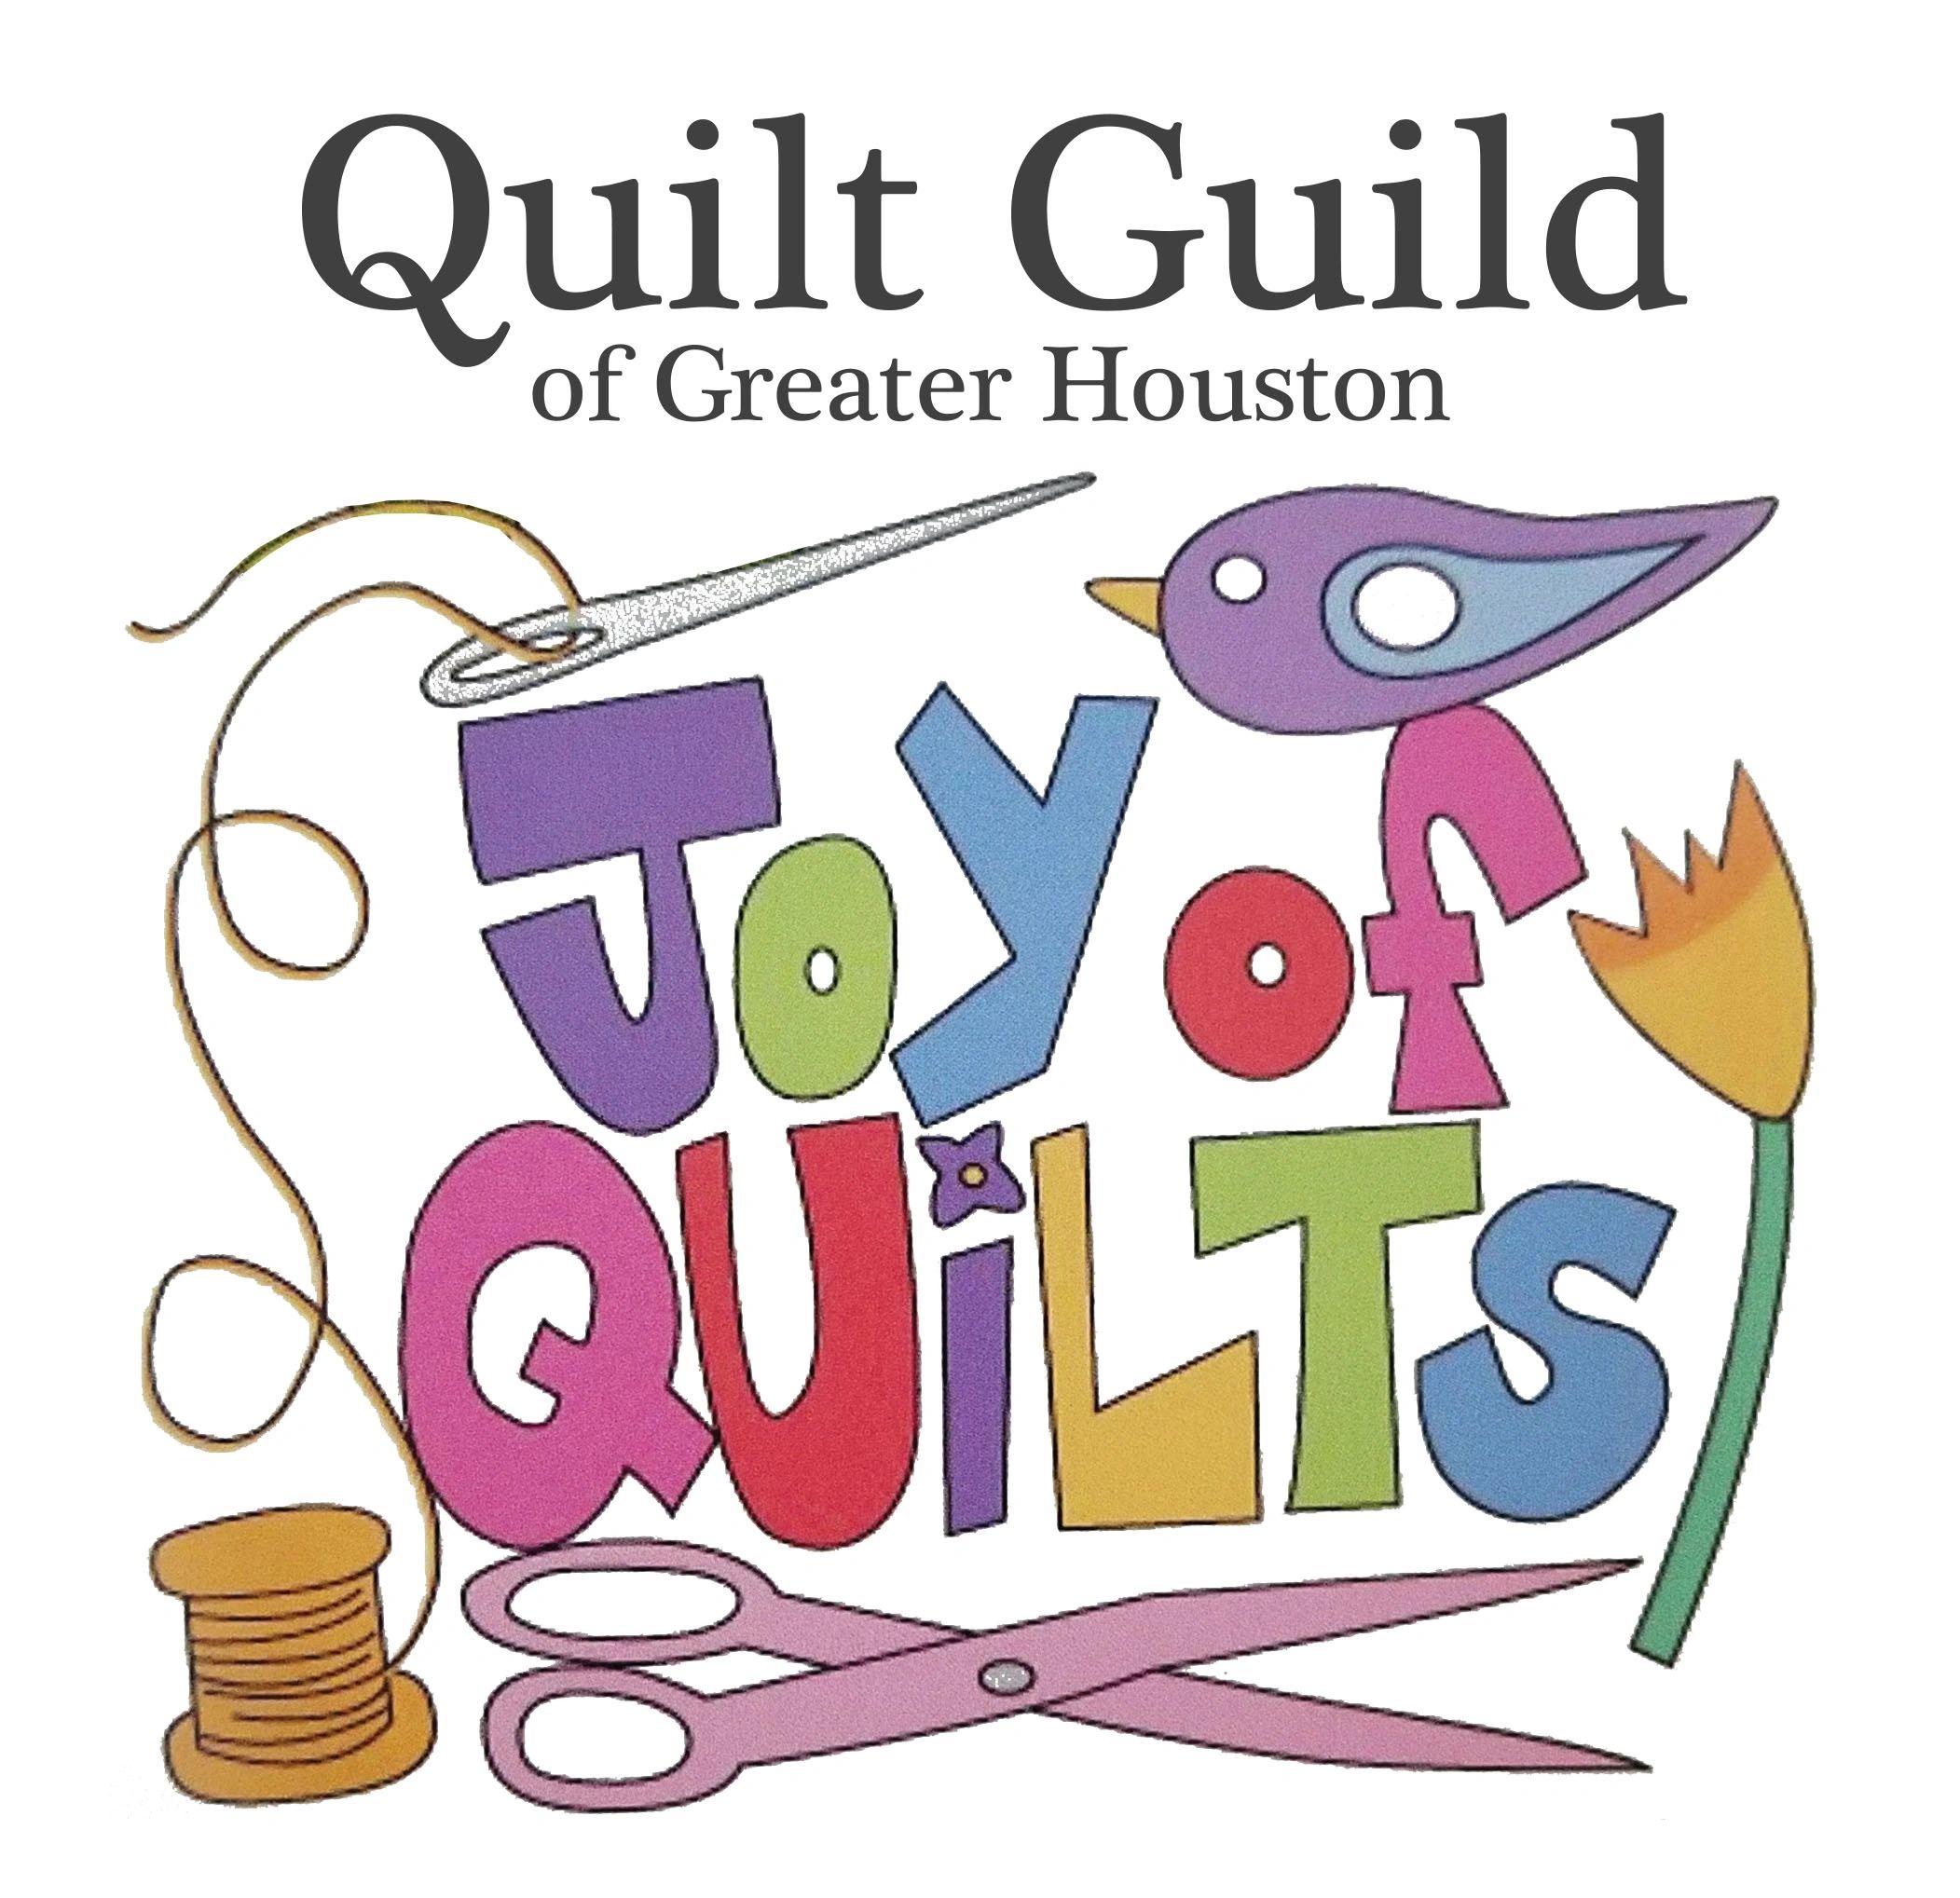 Joy of Quilts Quilt Show, Quilt Show sponsored by Quilt Guild of Greater Houston